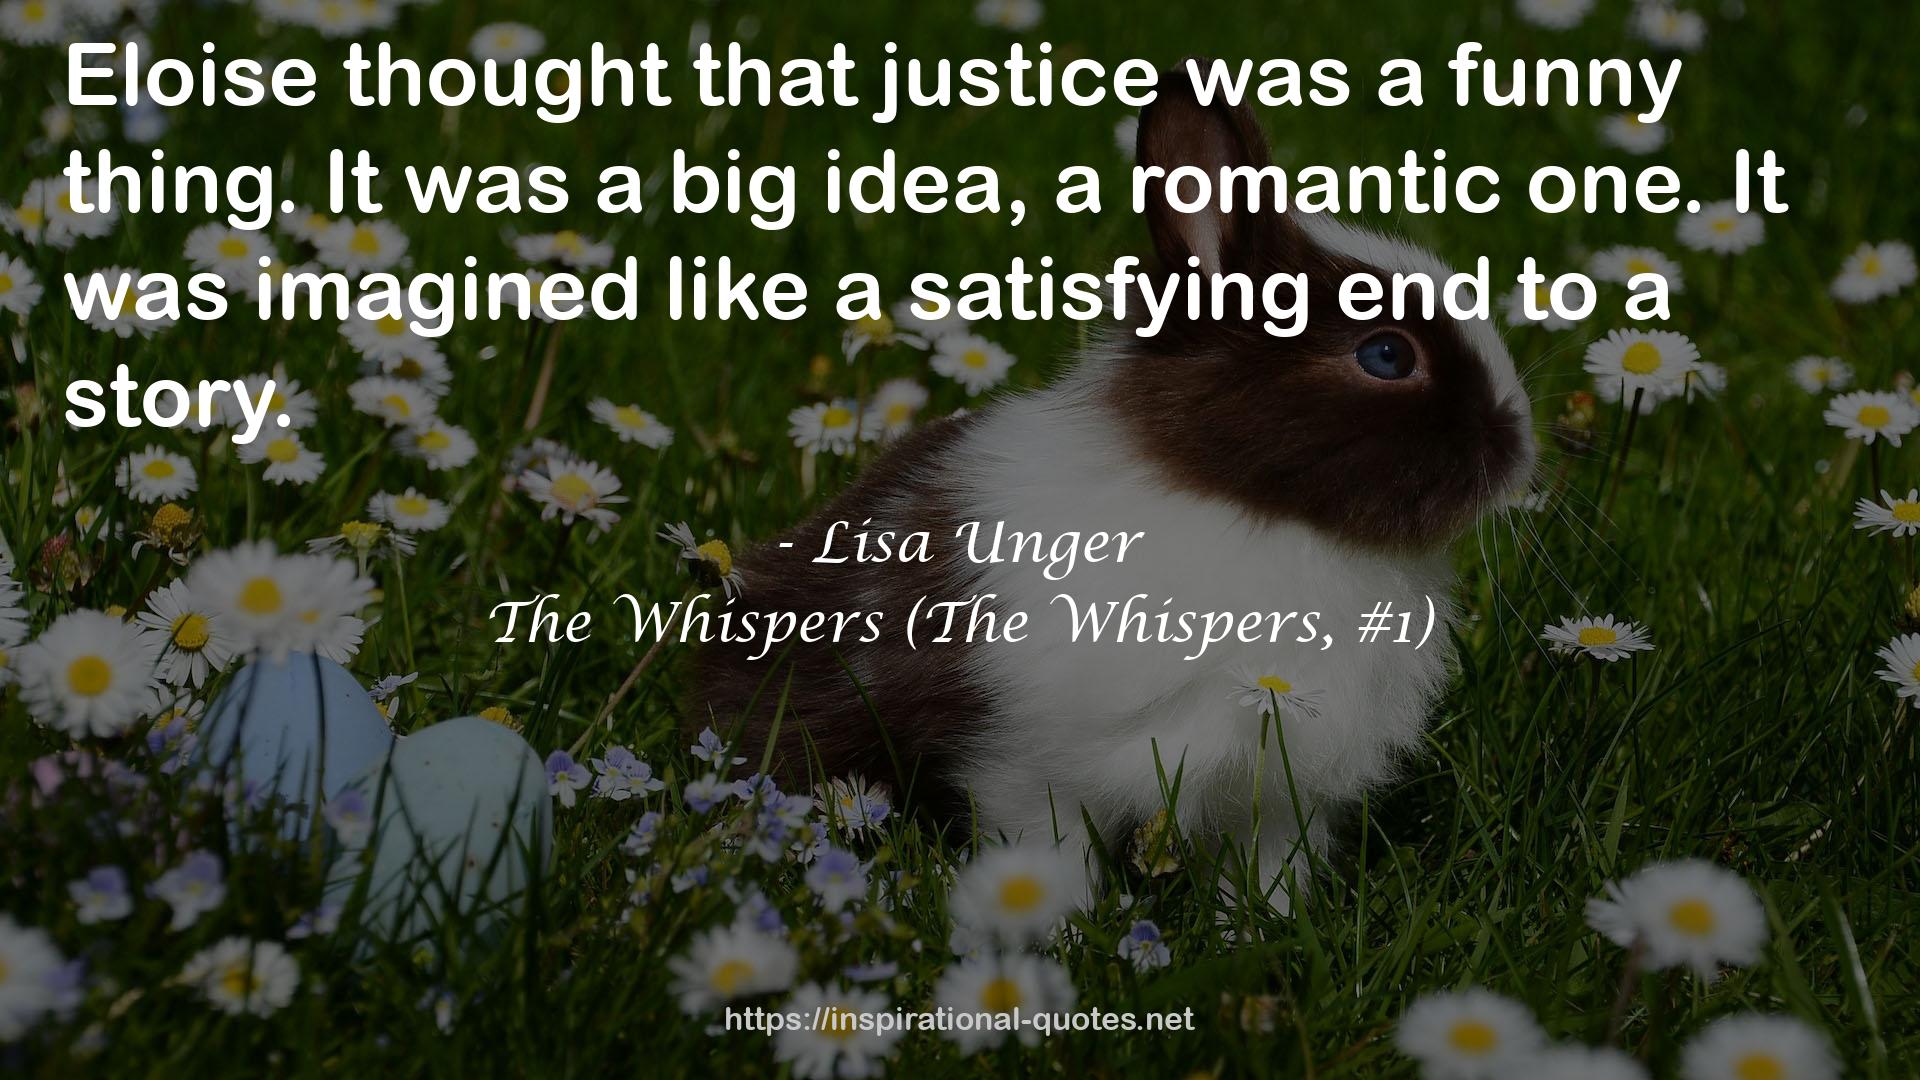 The Whispers (The Whispers, #1) QUOTES